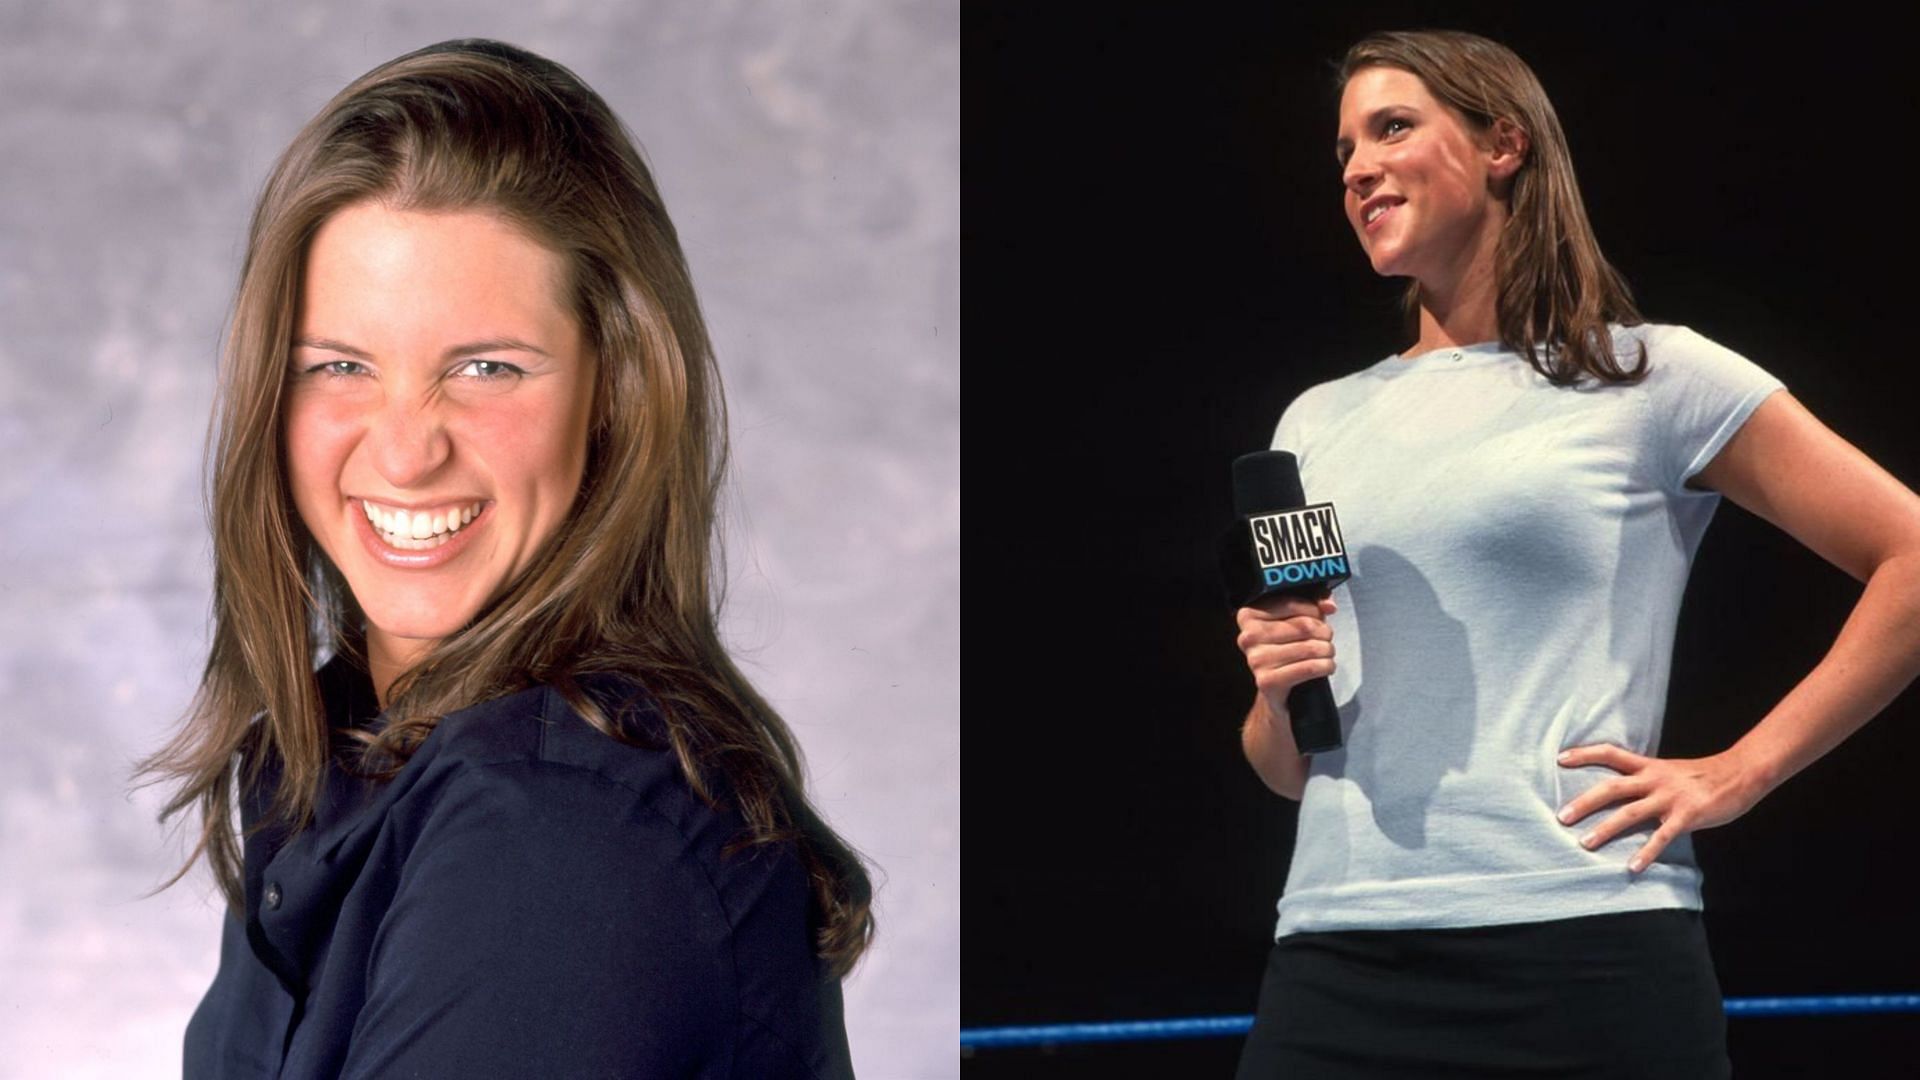 20 Less Than Flattering Facts About Triple H And Stephanie McMahon's  Relationship